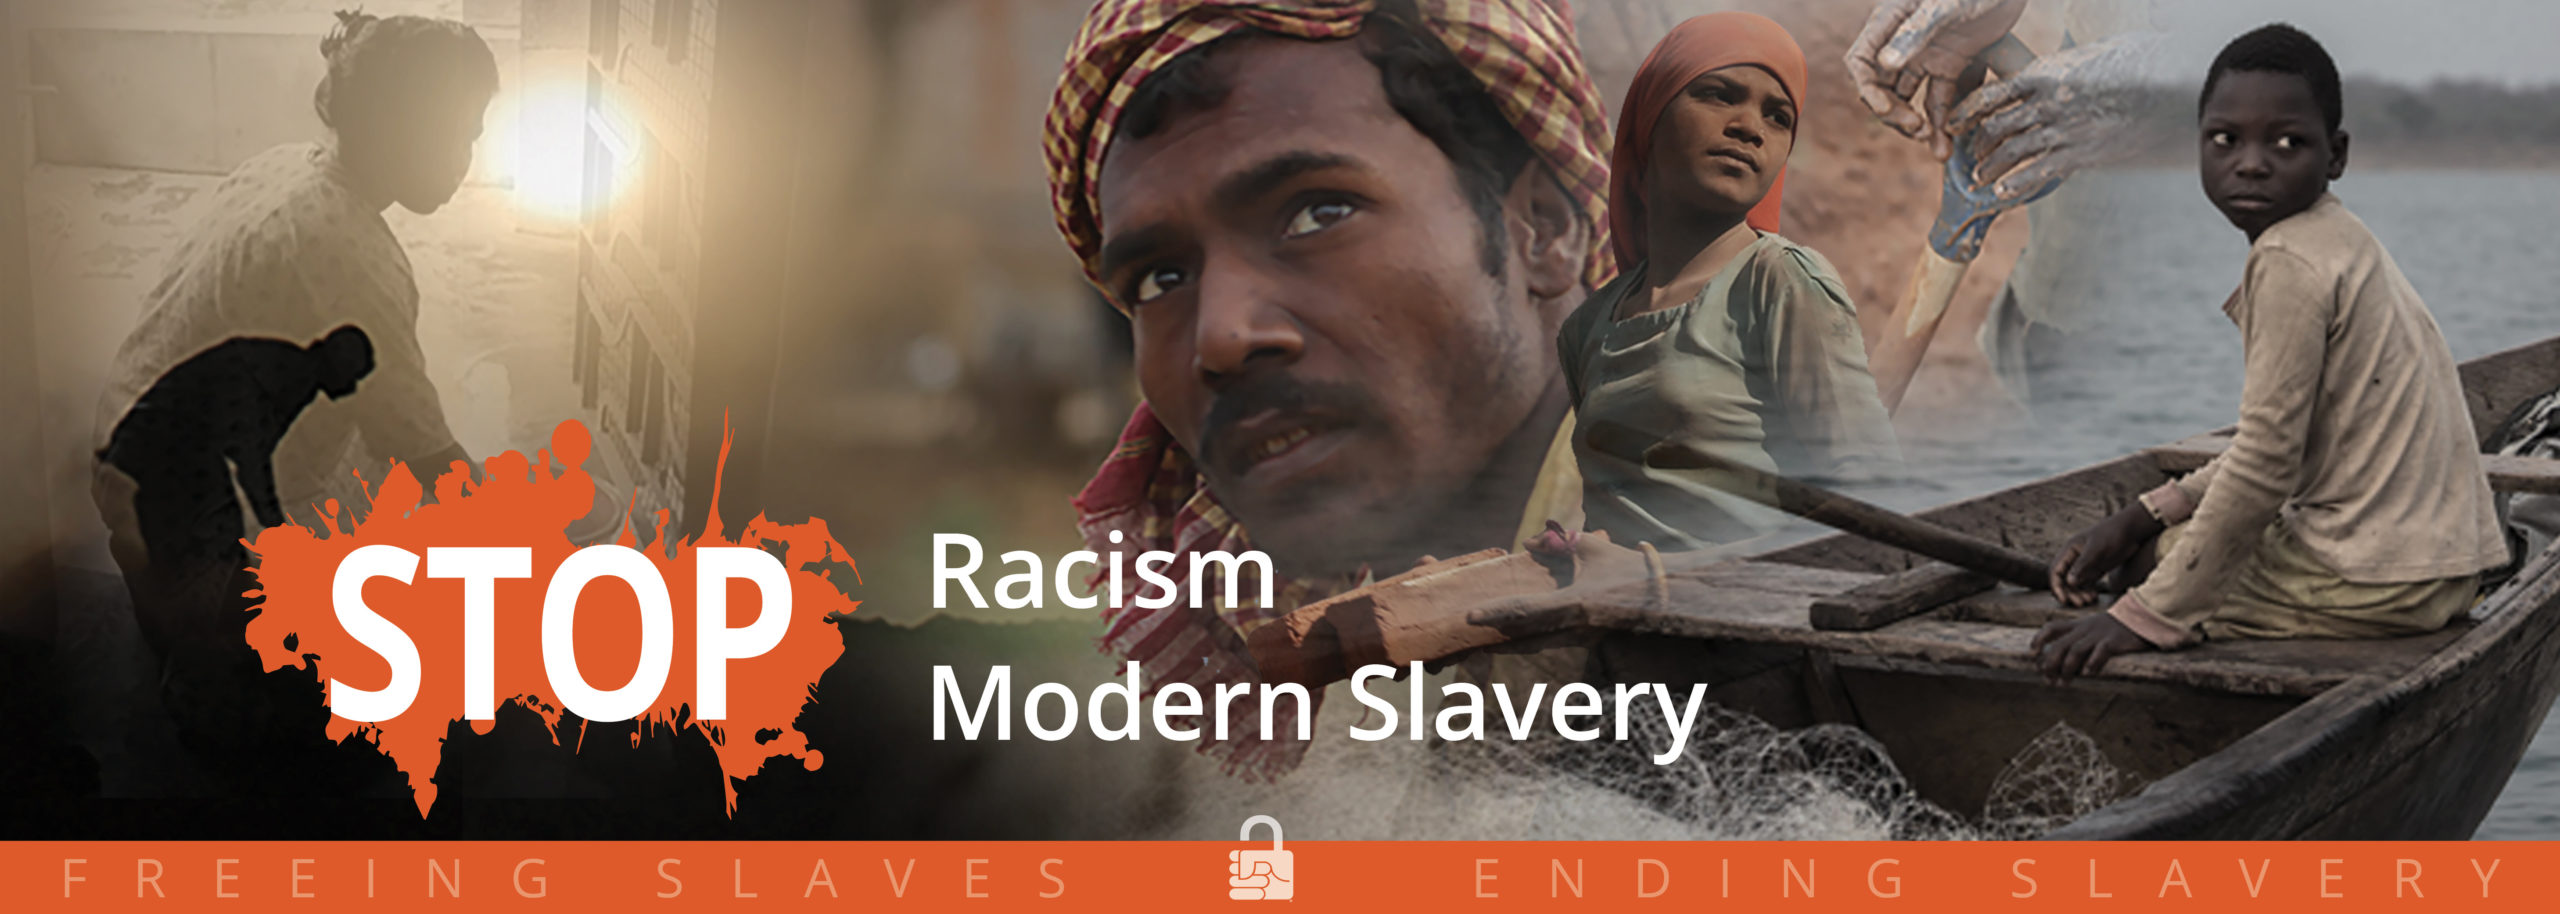 Are You Financing Modern Slavery and Racial Inequality?